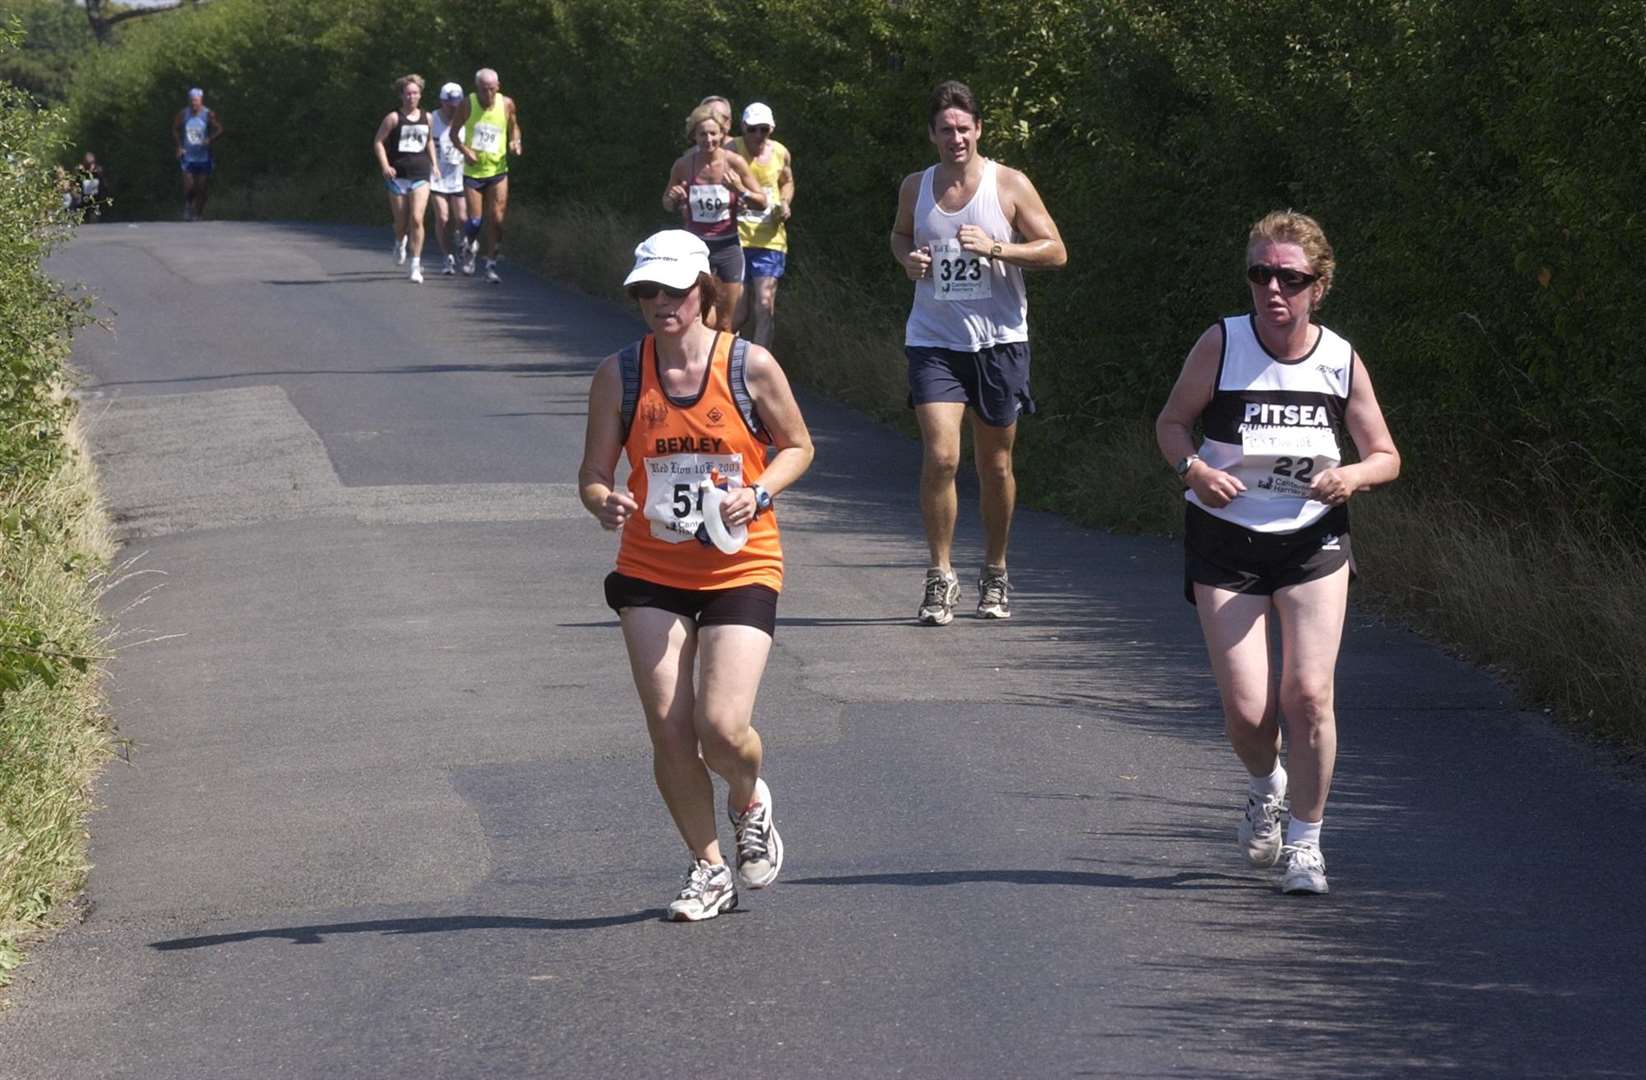 Runners wending their weary way home in the Canterbury Harriers Red Lion 10k on the hottest-day ever recorded in the UK in 2003